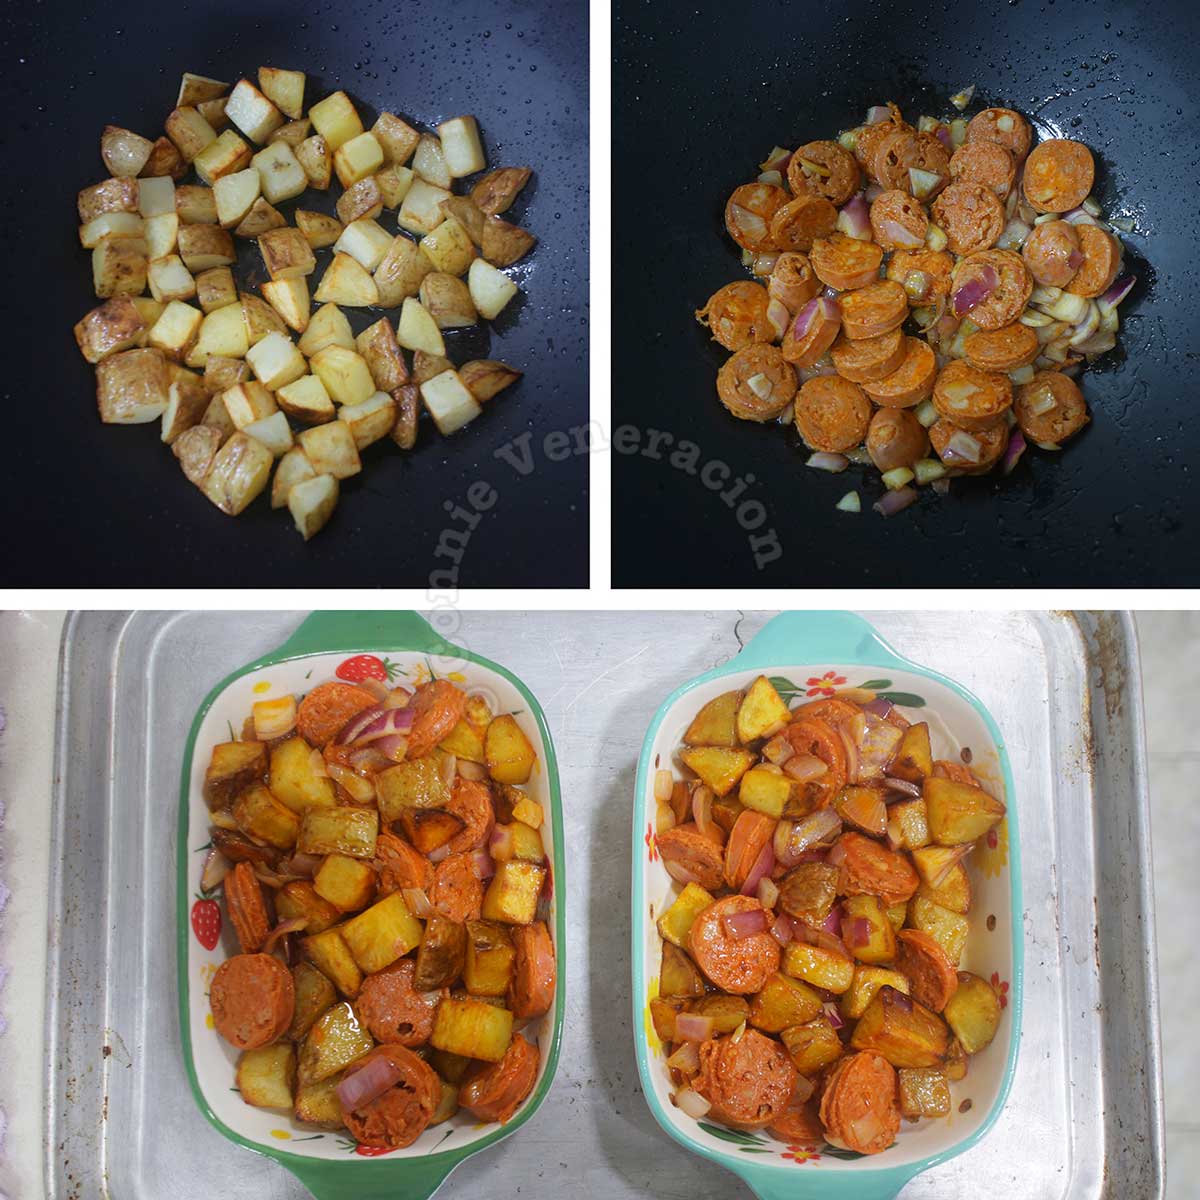 Frying potatoes and sausages, and transferring them into baking pans